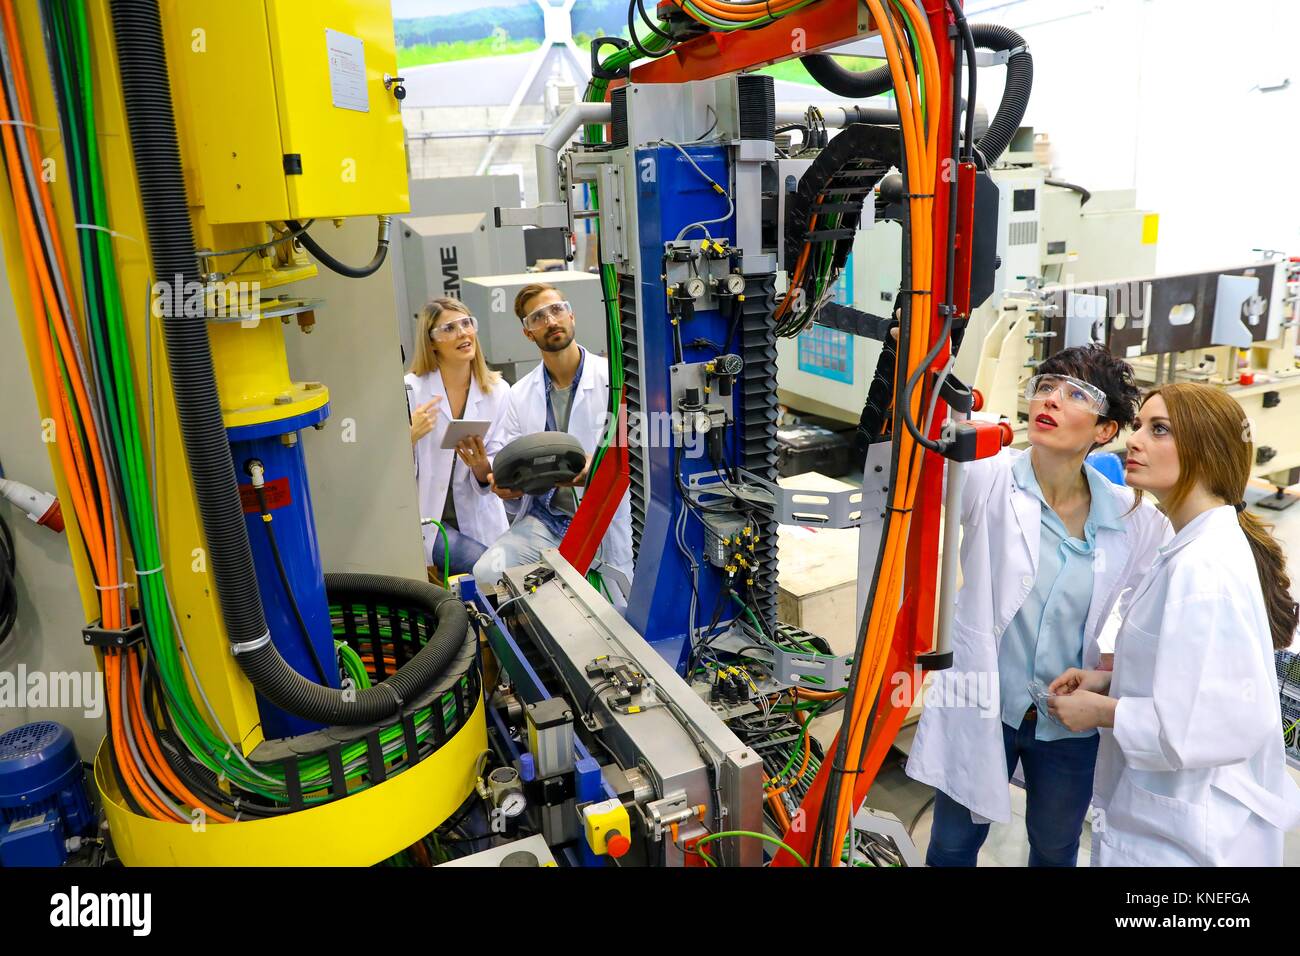 Robotic mobile platform for aeronautical drilling. Researchers working on portable robot to drill holes into aircraft components, Industry, Research Stock Photo